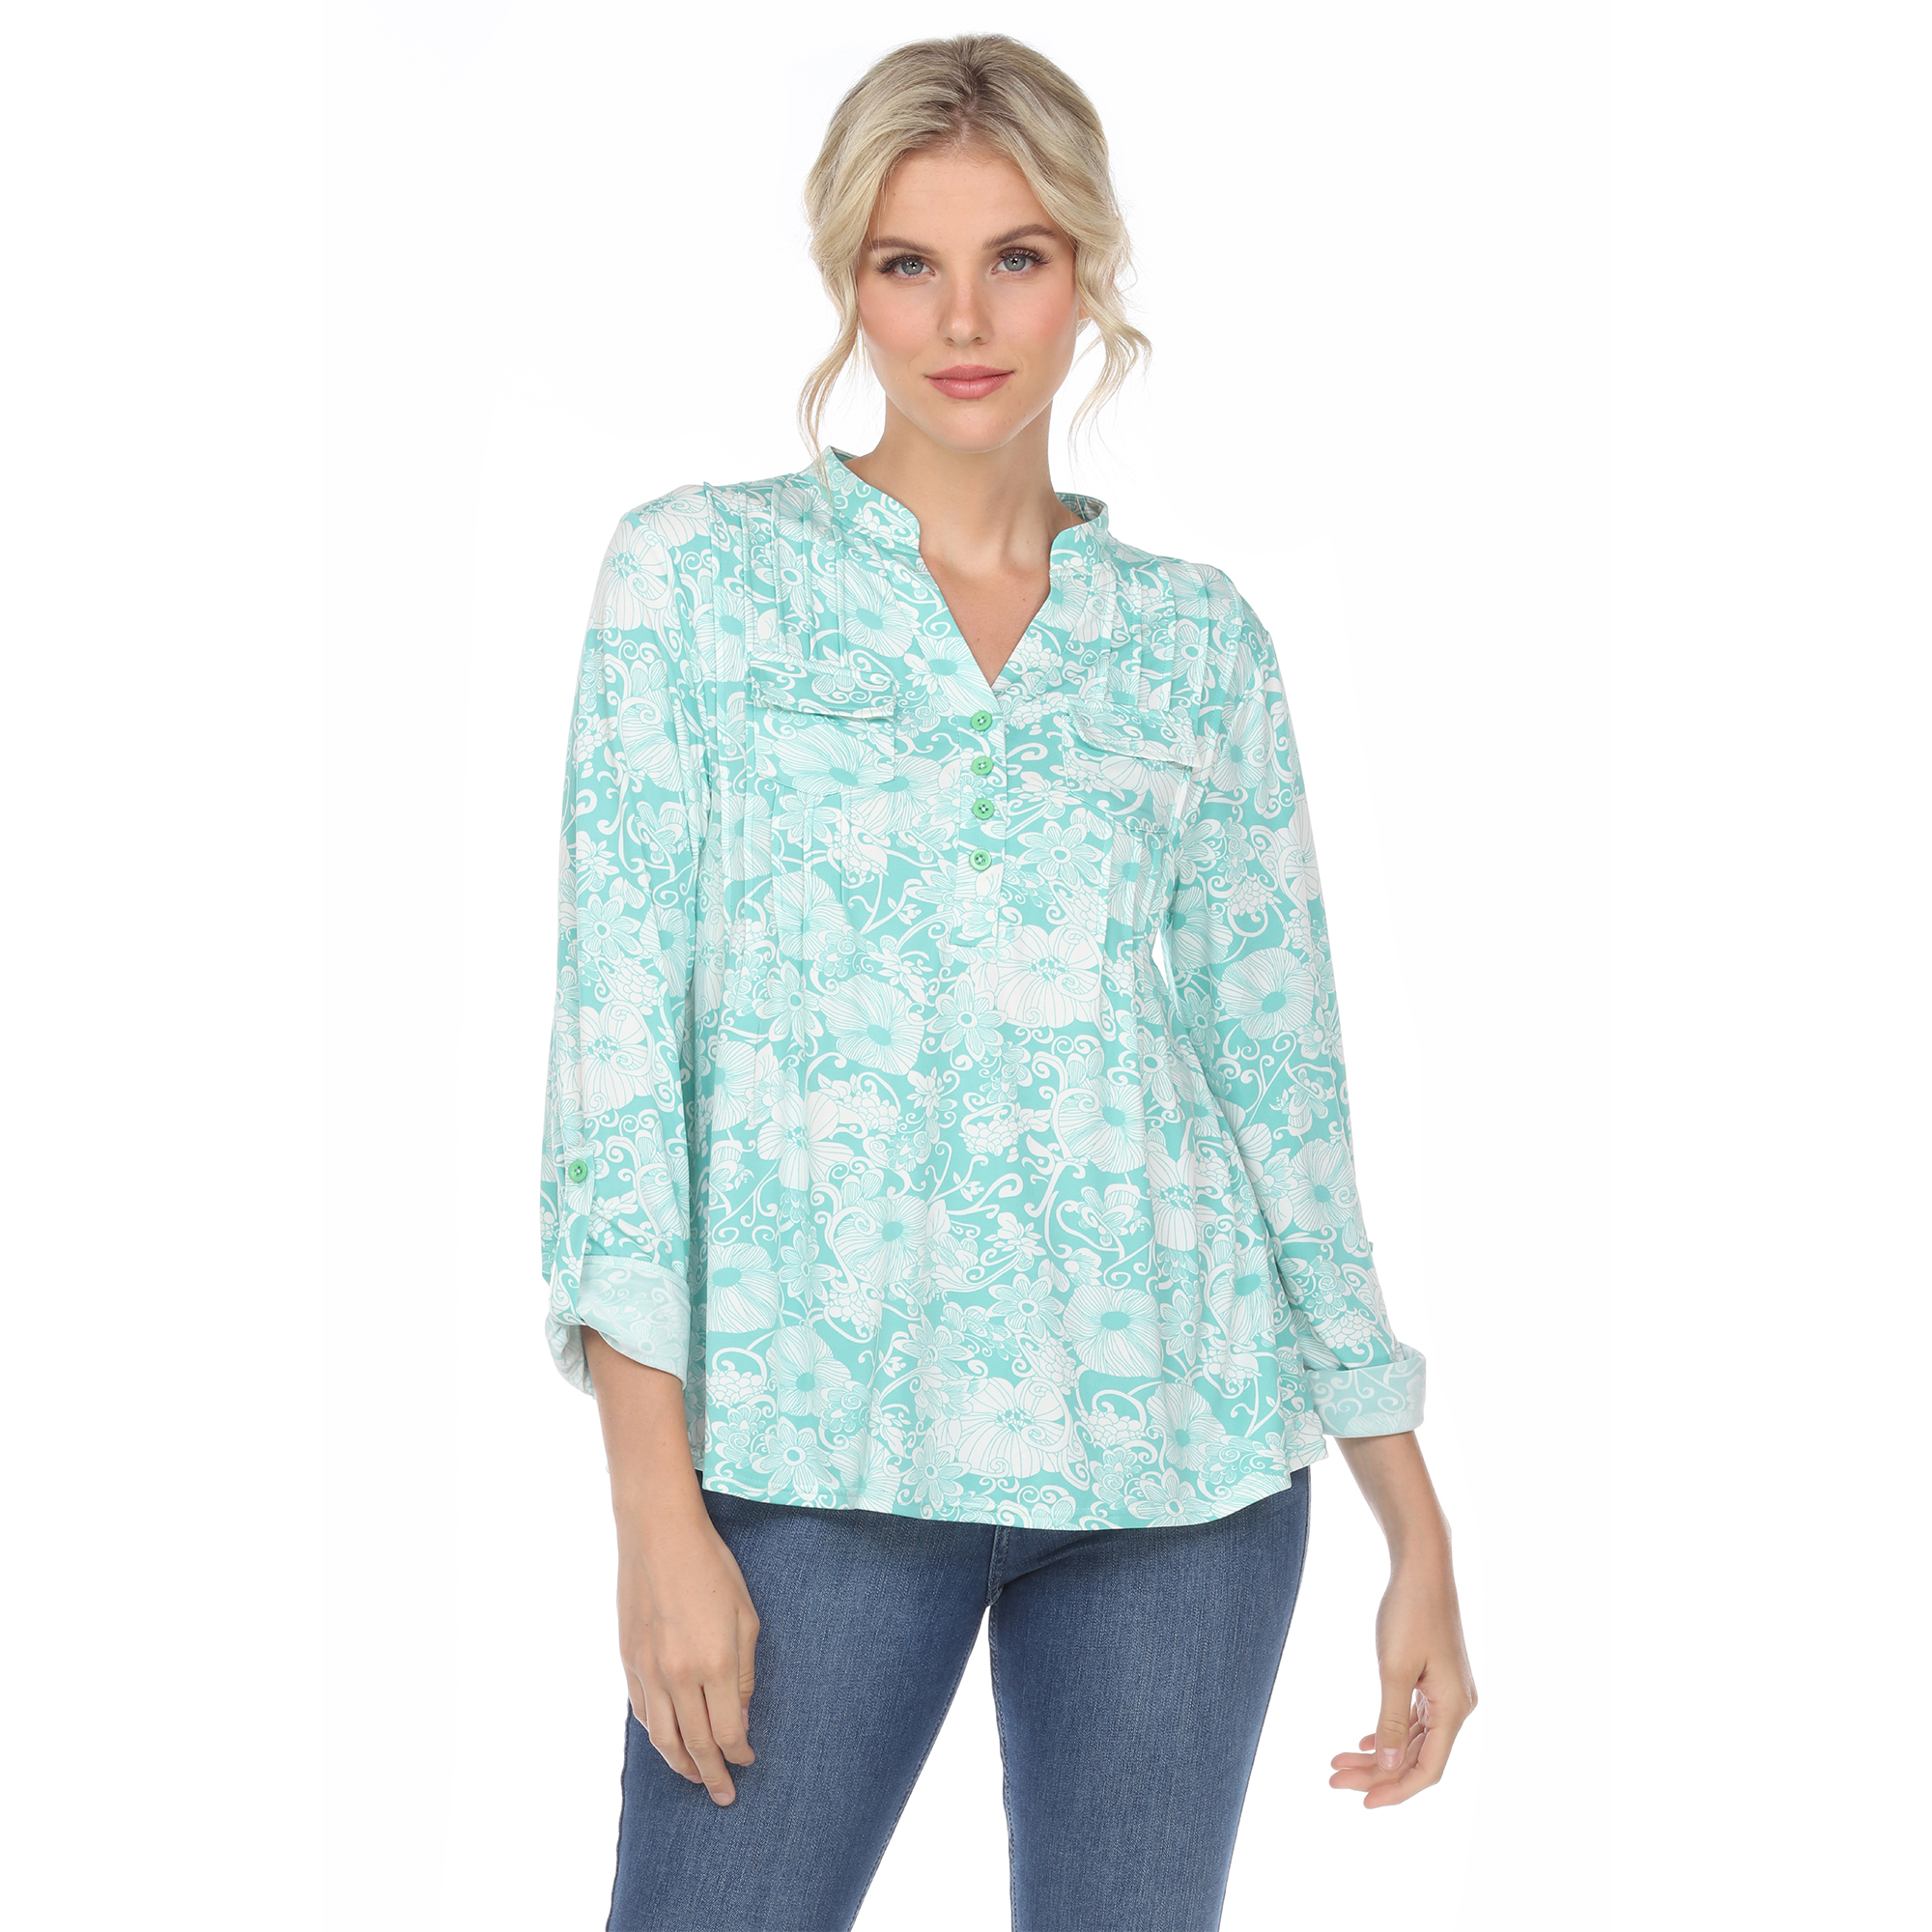 White Mark Women's Pleated Long Sleeve Floral Print Blouse - Mint, X-Large